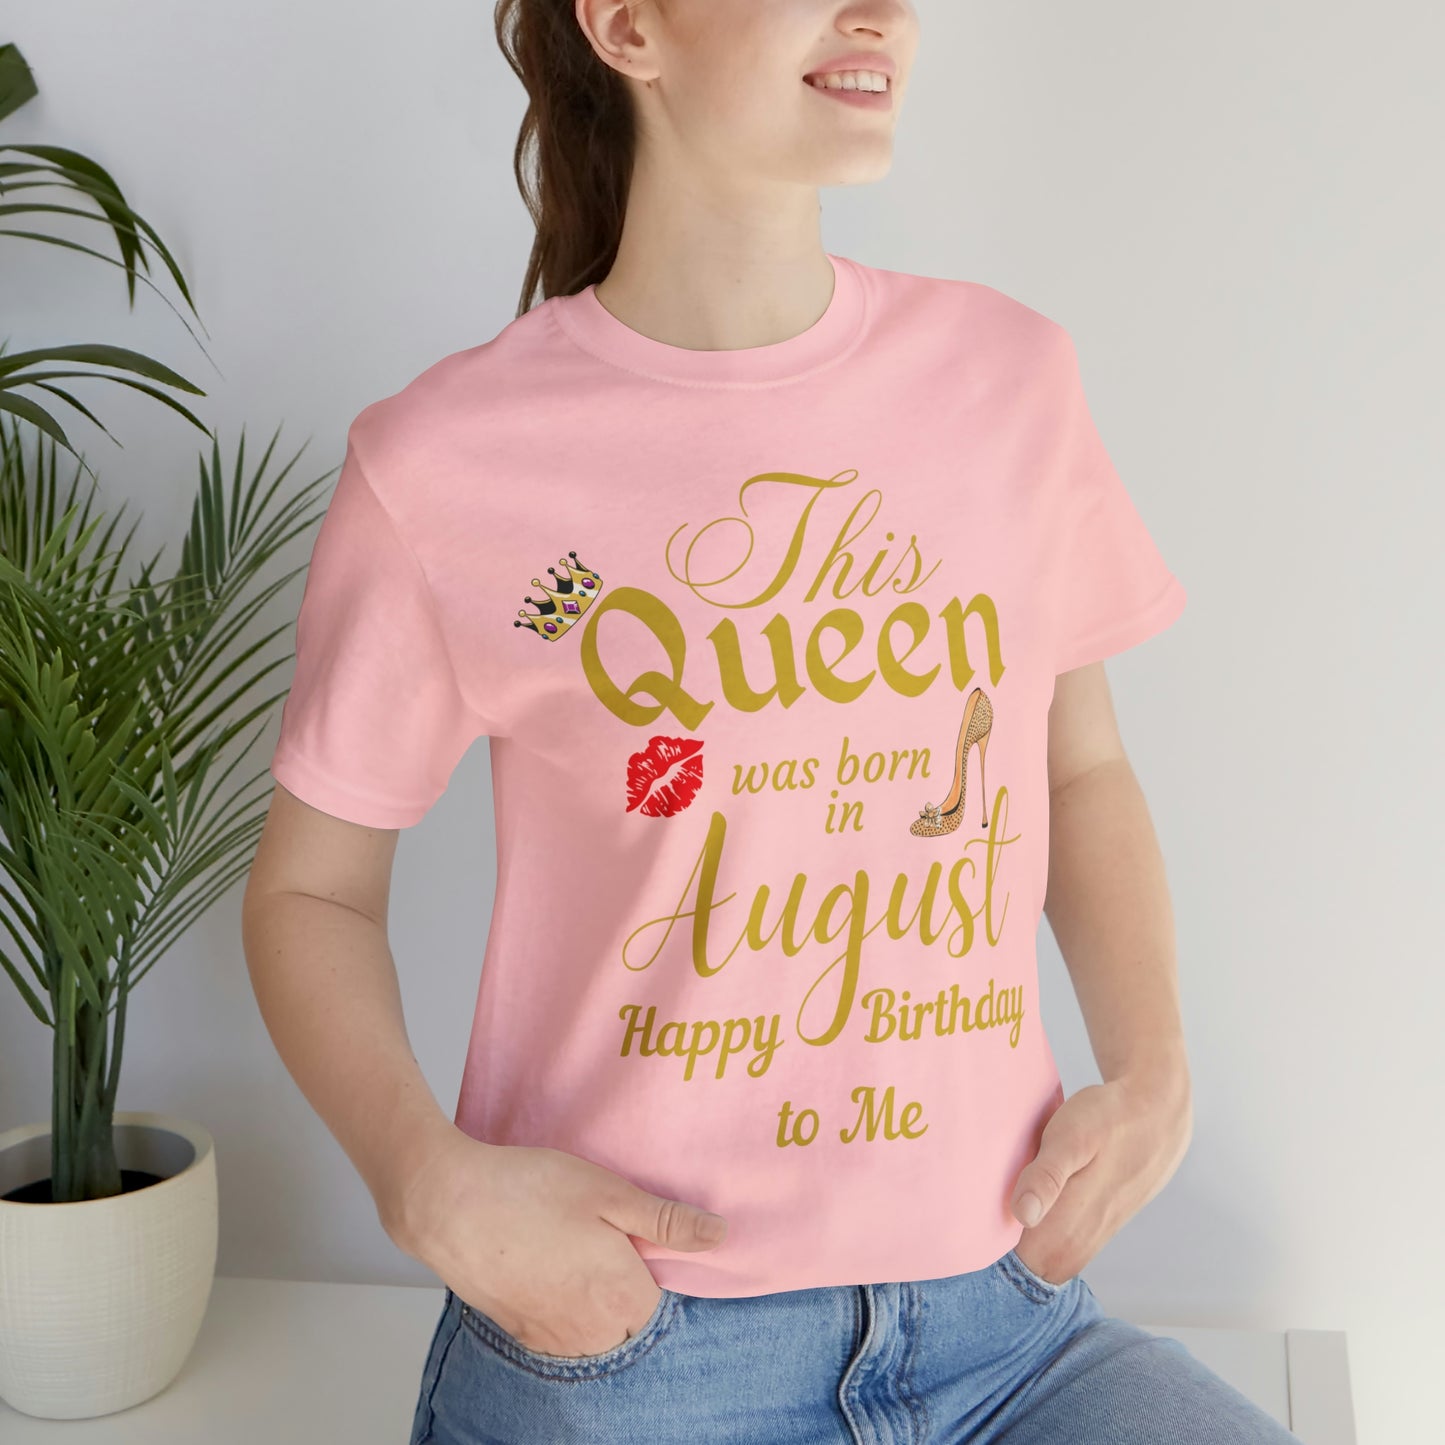 Birthday Queen Shirt, Gift for birthday, This Queen was born in August shirt, Funny Queen shirt, funny Birthday shirt, birthday gift